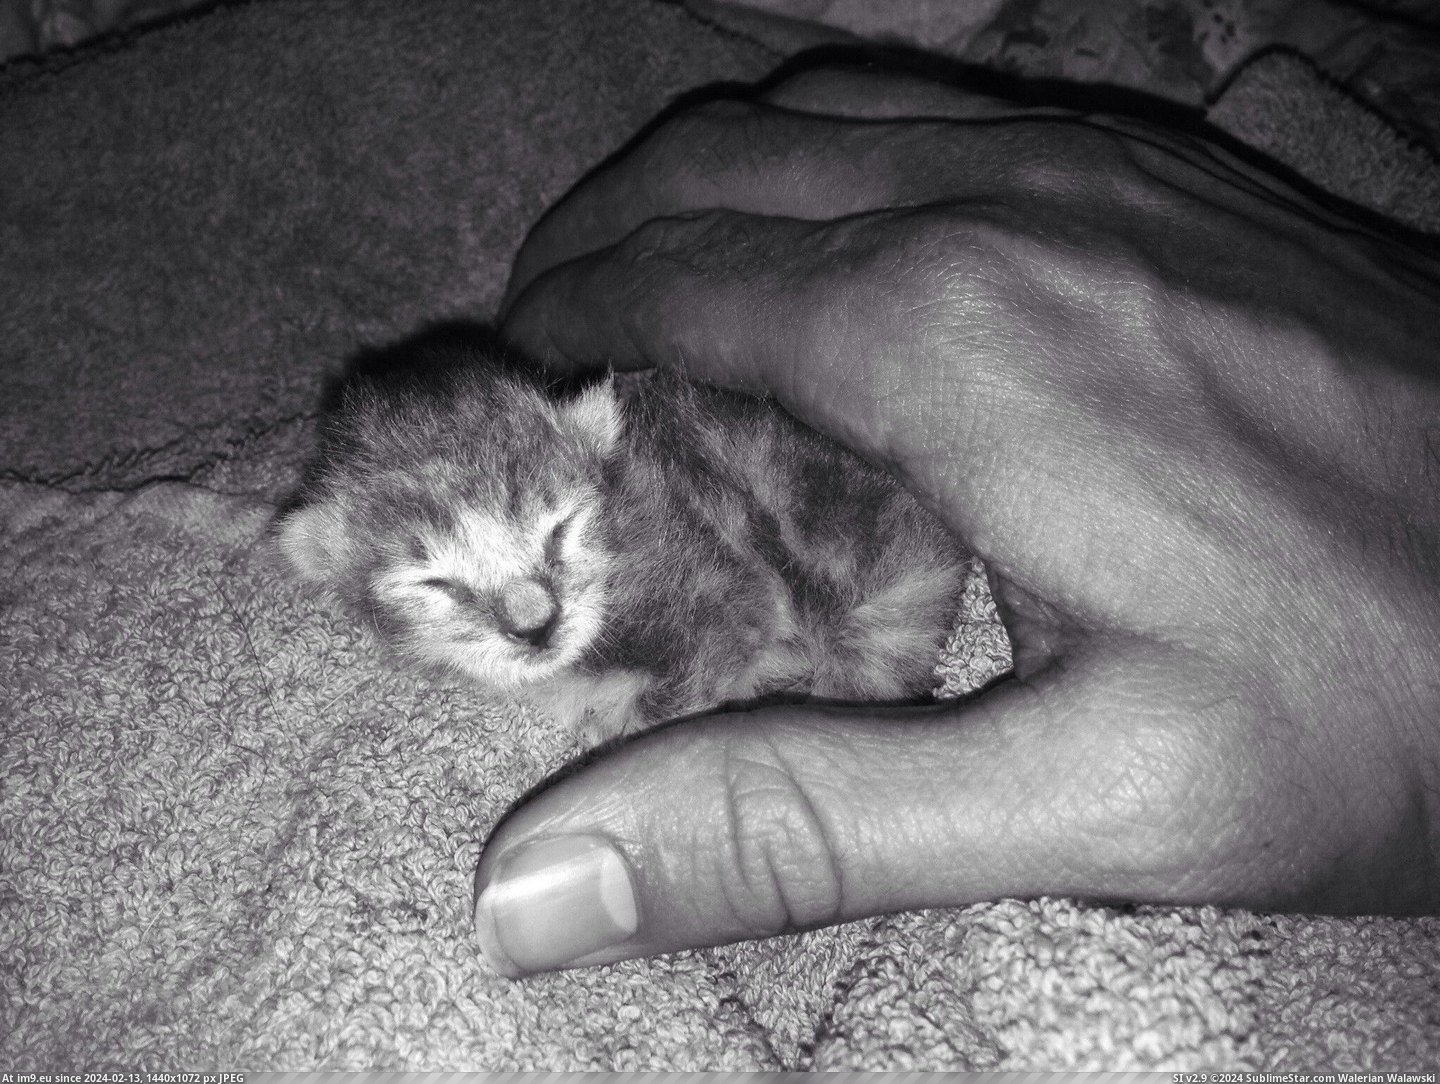 #Cat #Old #Thumb #Size #Unexpected #Kitten #Single [Aww] Our 13 your old cat had a single unexpected kitten today. He's about the size of my thumb Pic. (Obraz z album My r/AWW favs))